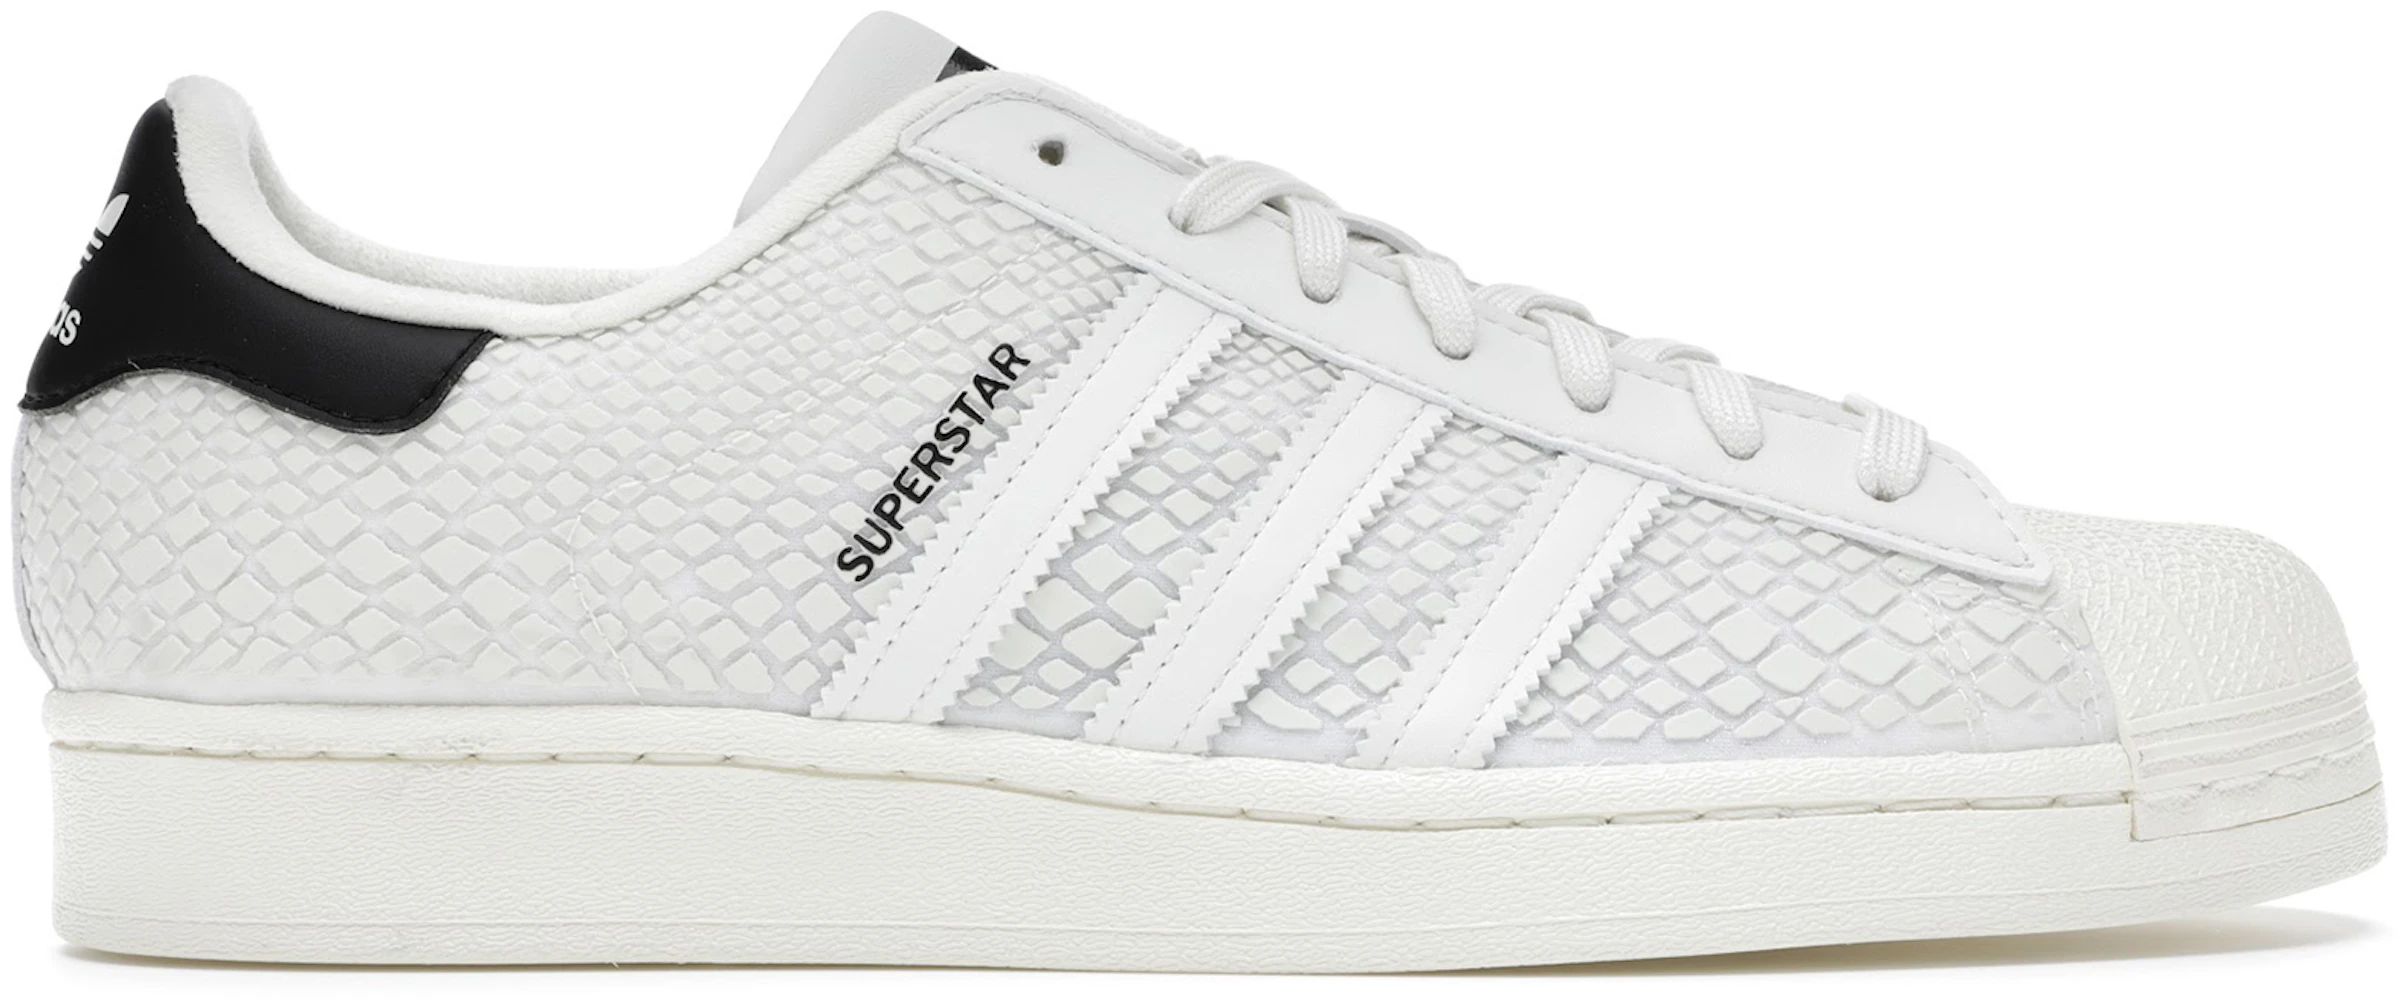 adidas Superstar Shoes & New Sneakers - StockX